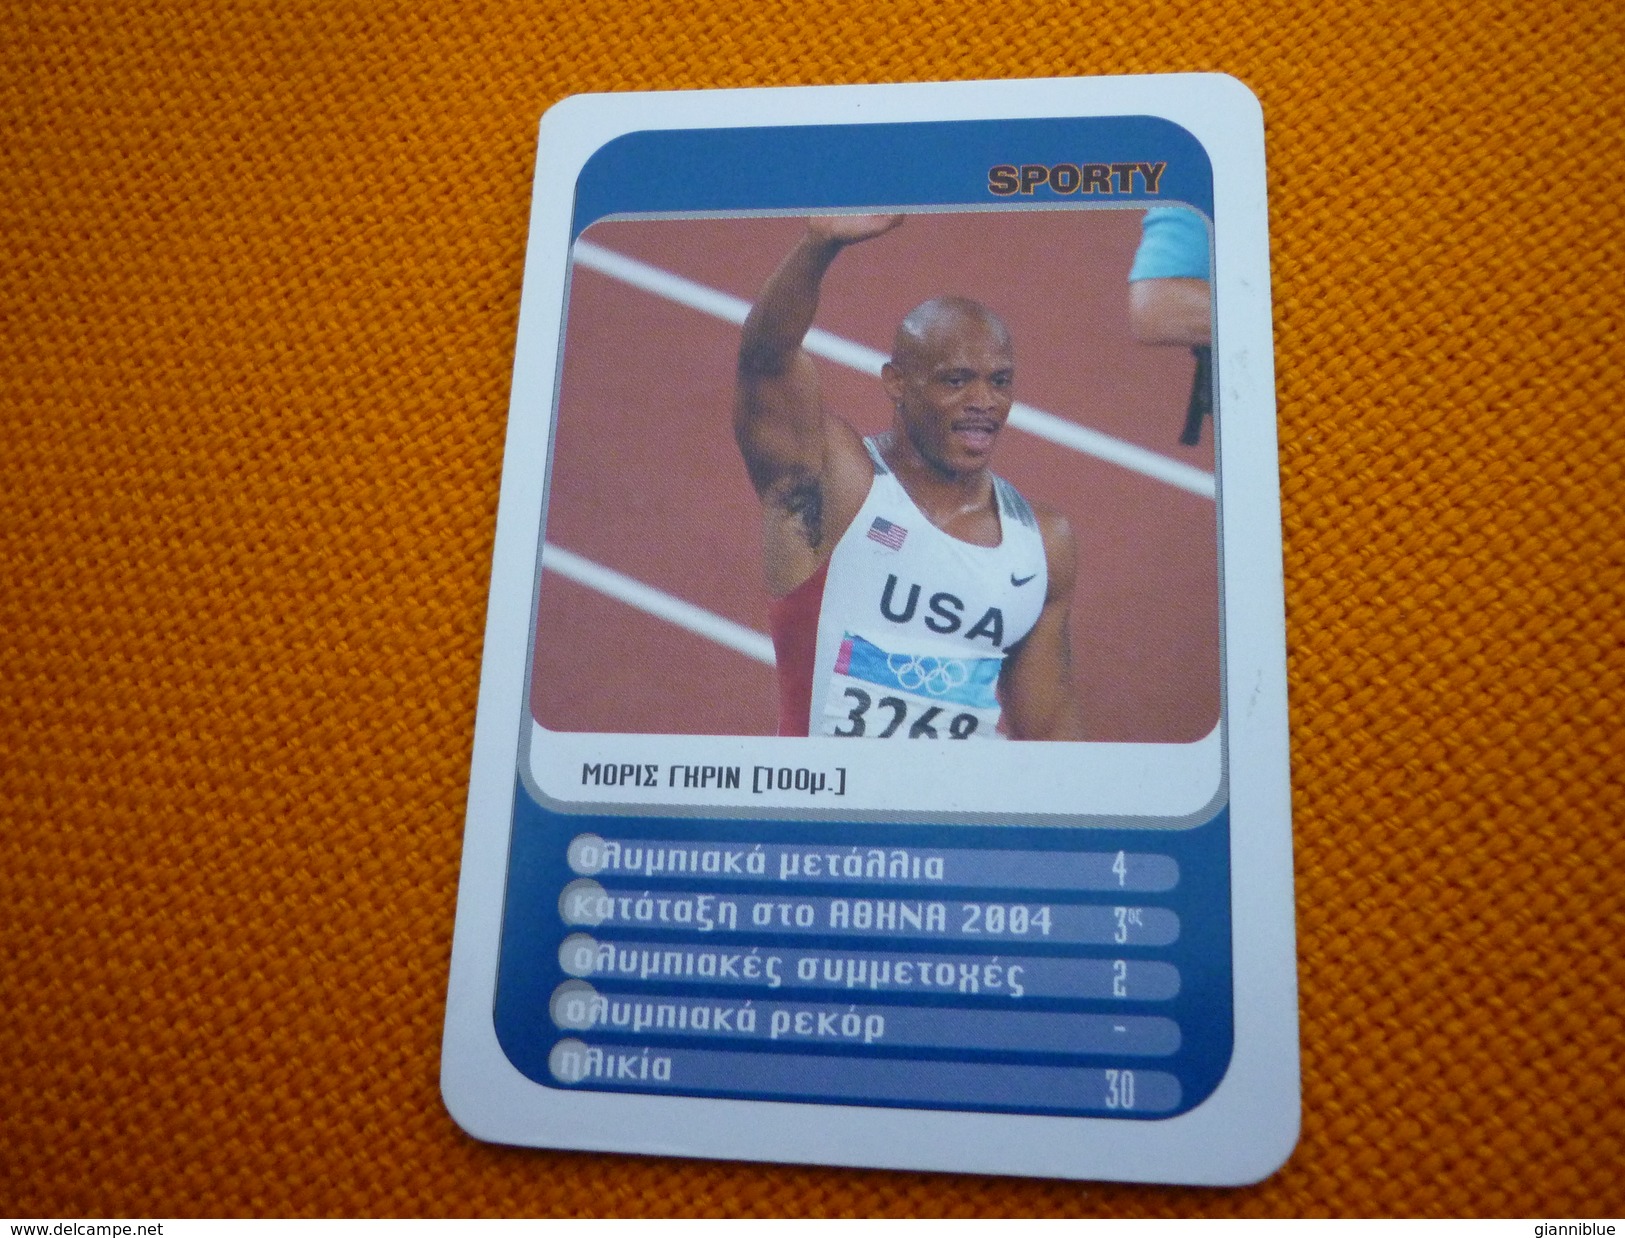 Maurice Greene US American 100 M Sprinter Sprint Athens 2004 Olympic Games Medalist Greece Greek Trading Card - Trading Cards